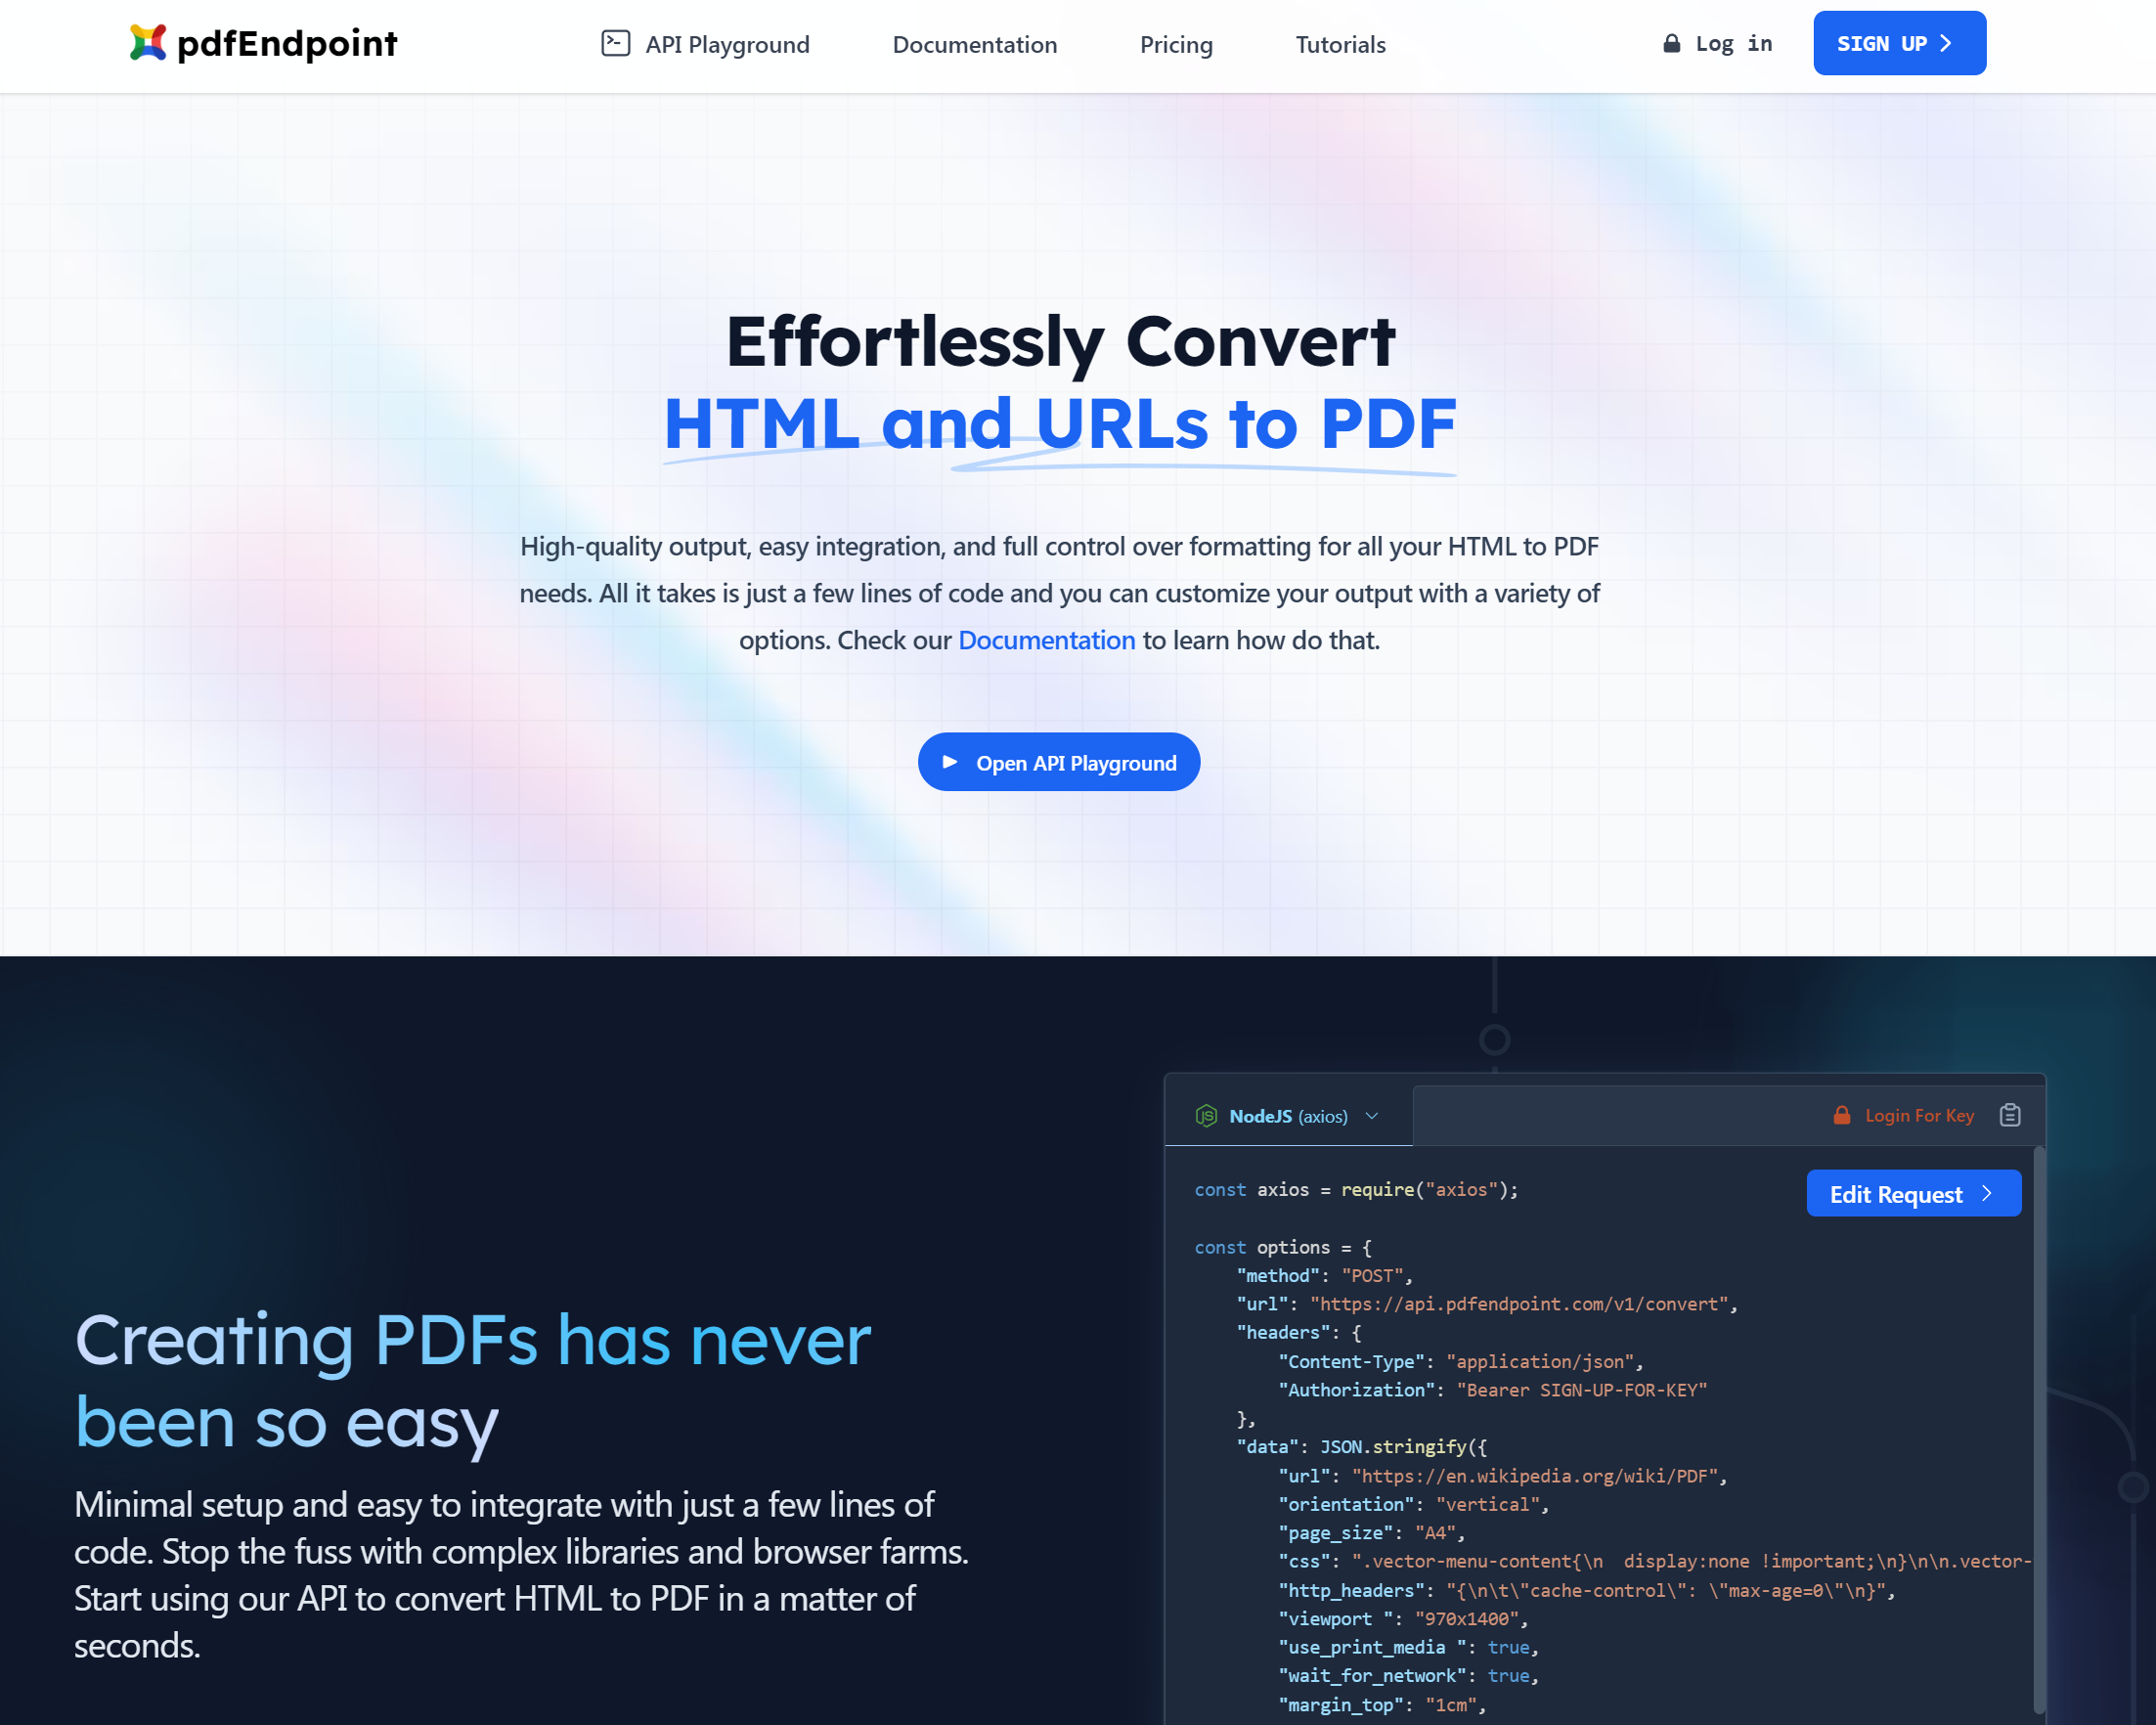 pdfEndpoint Landing page